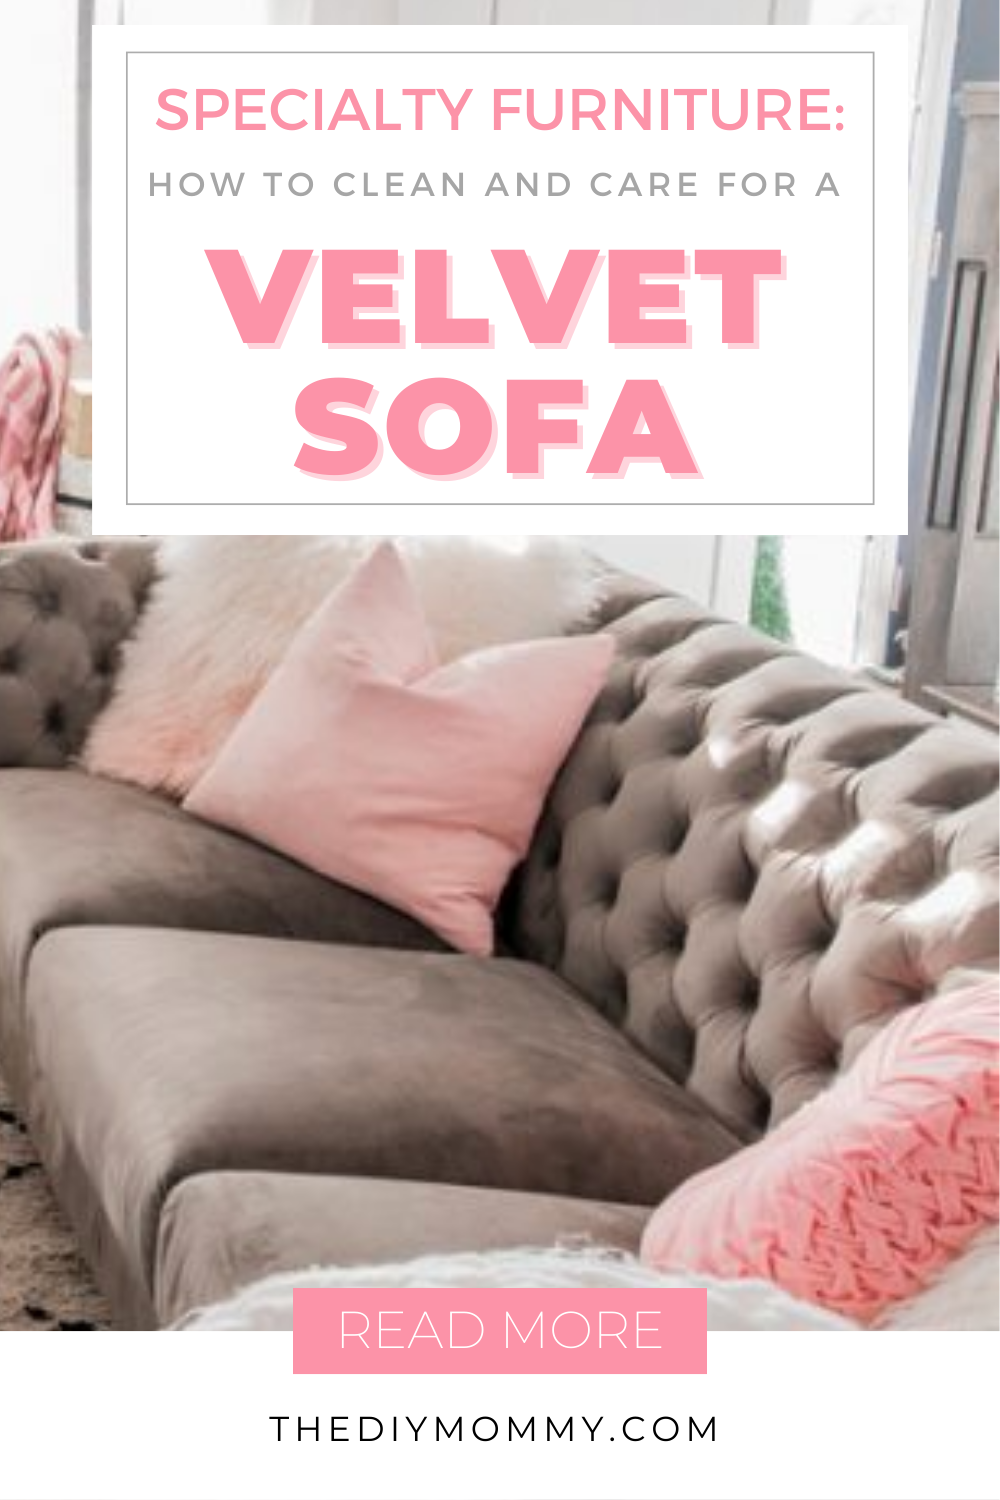 Specialty Furniture: How to Clean and Care for a Velvet Sofa